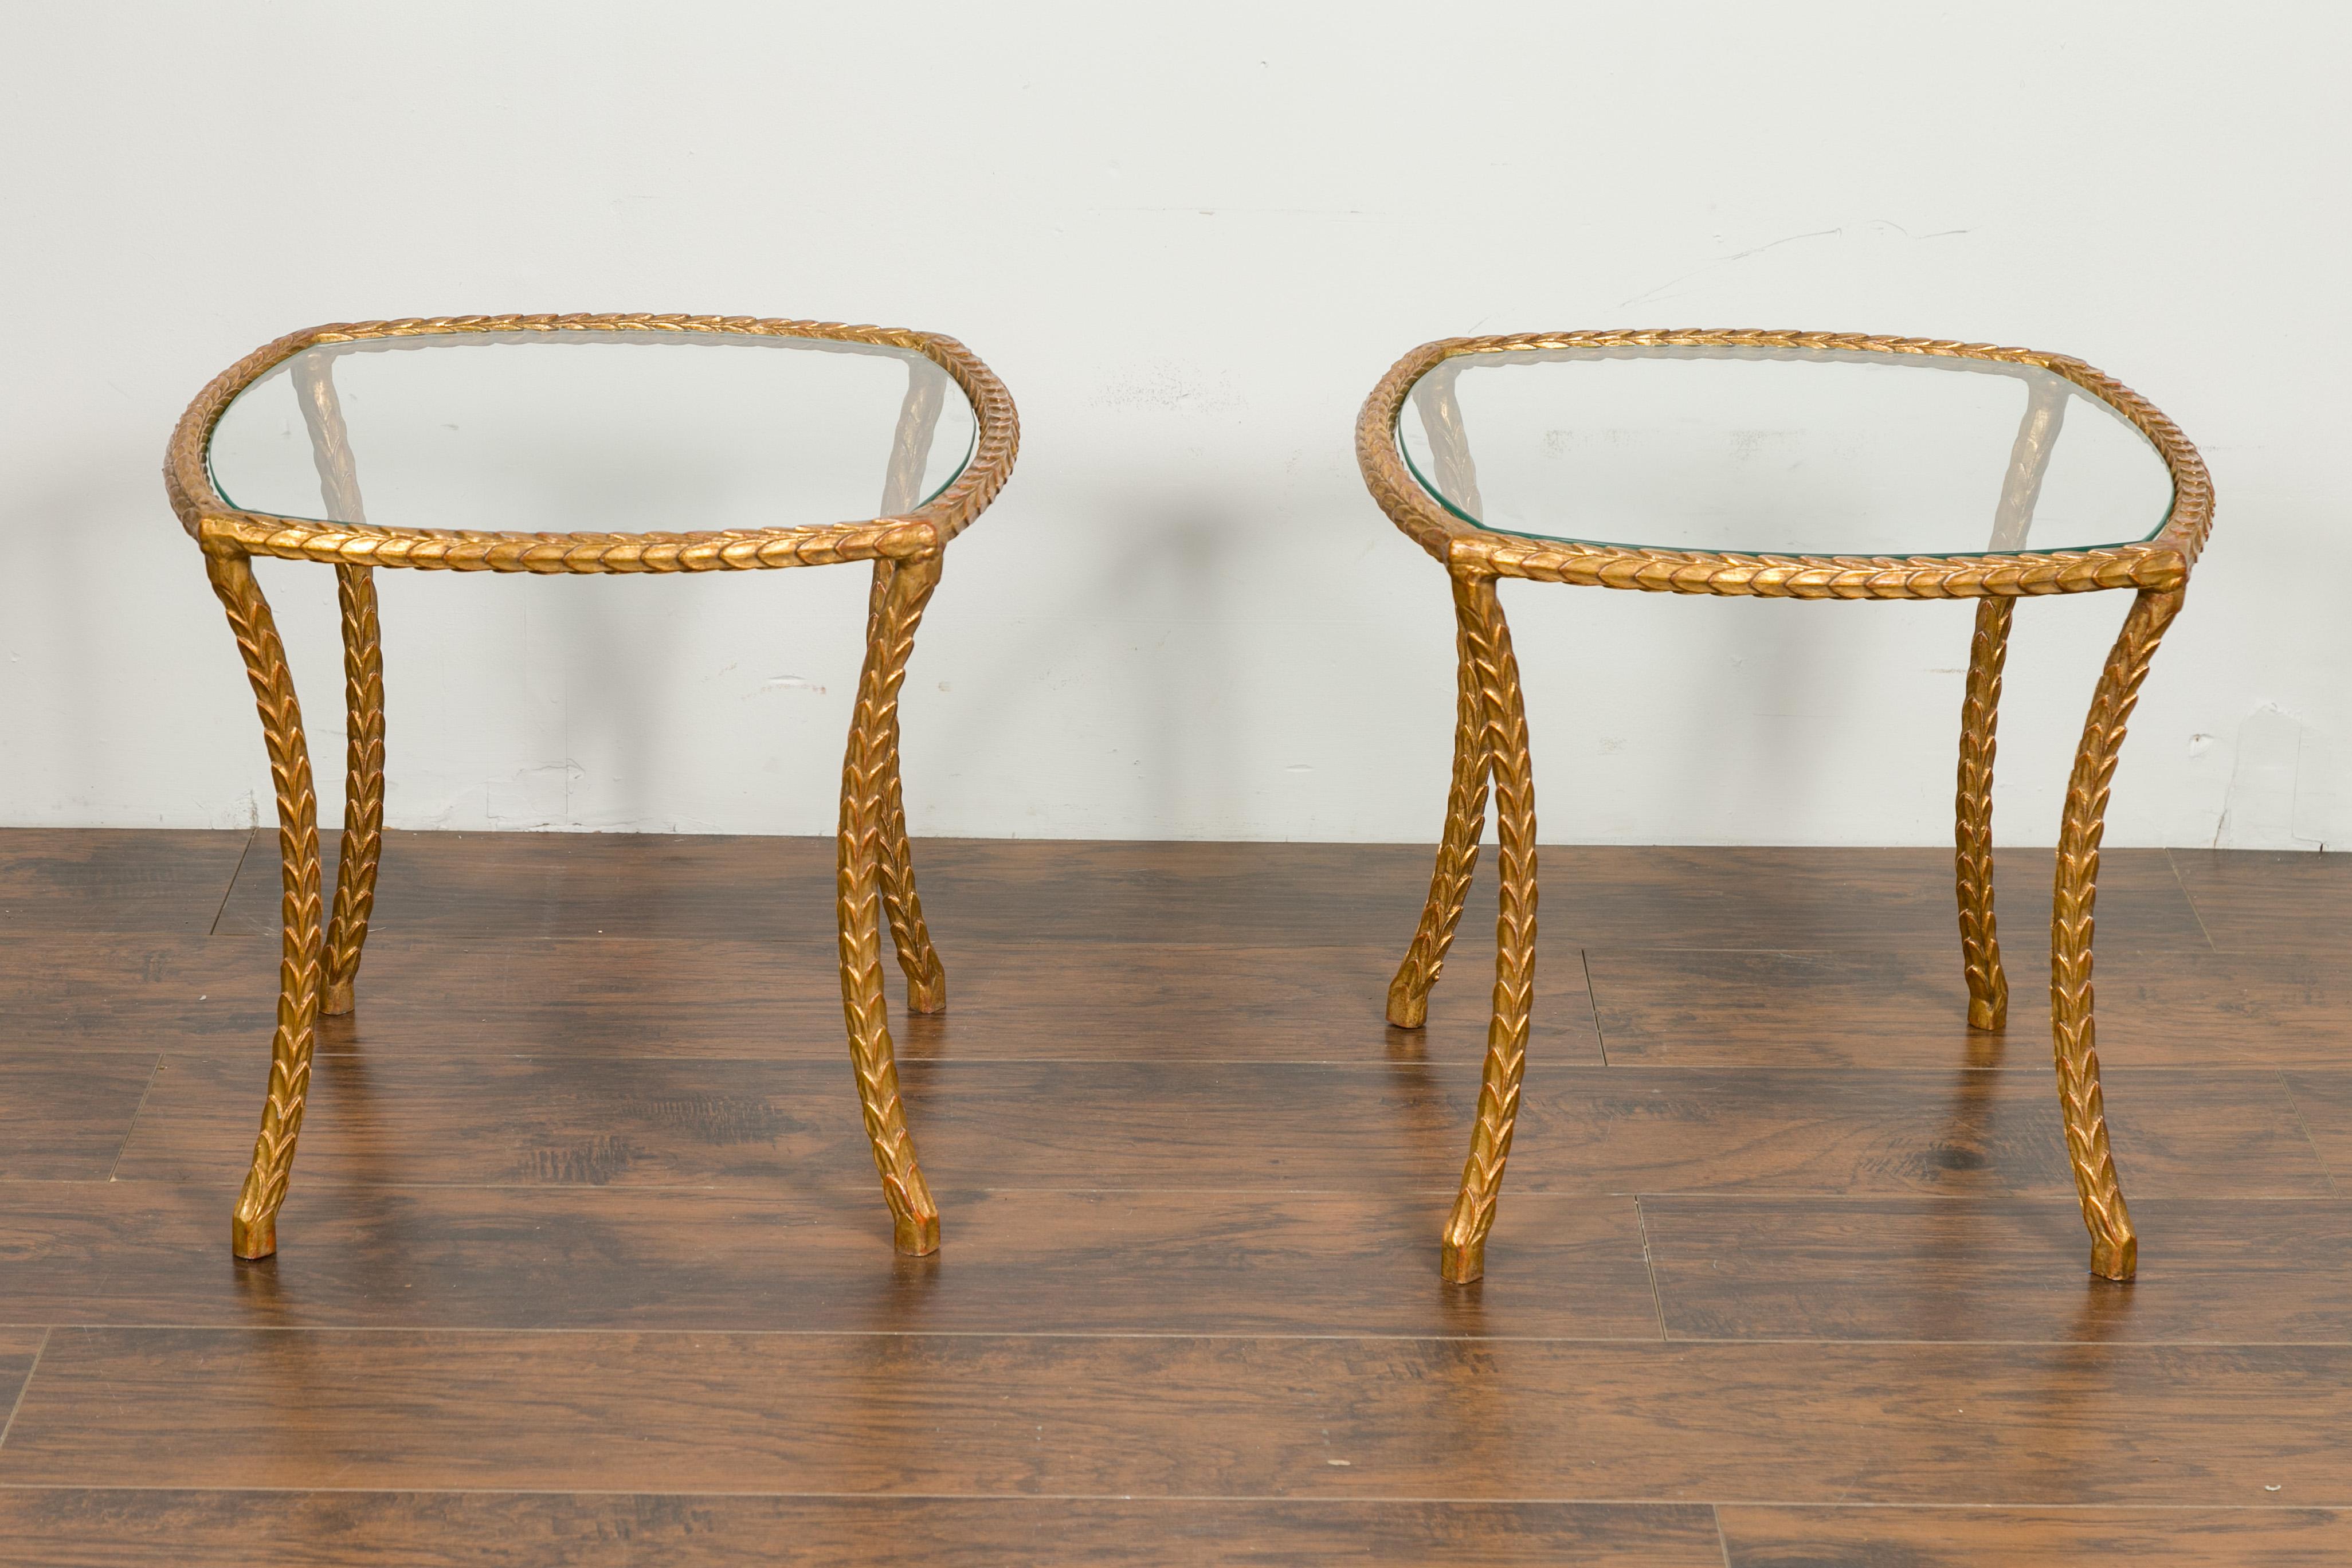 Pair of Midcentury French Maison Baguès Style Gilt Bronze Tables with Glass Tops For Sale 8